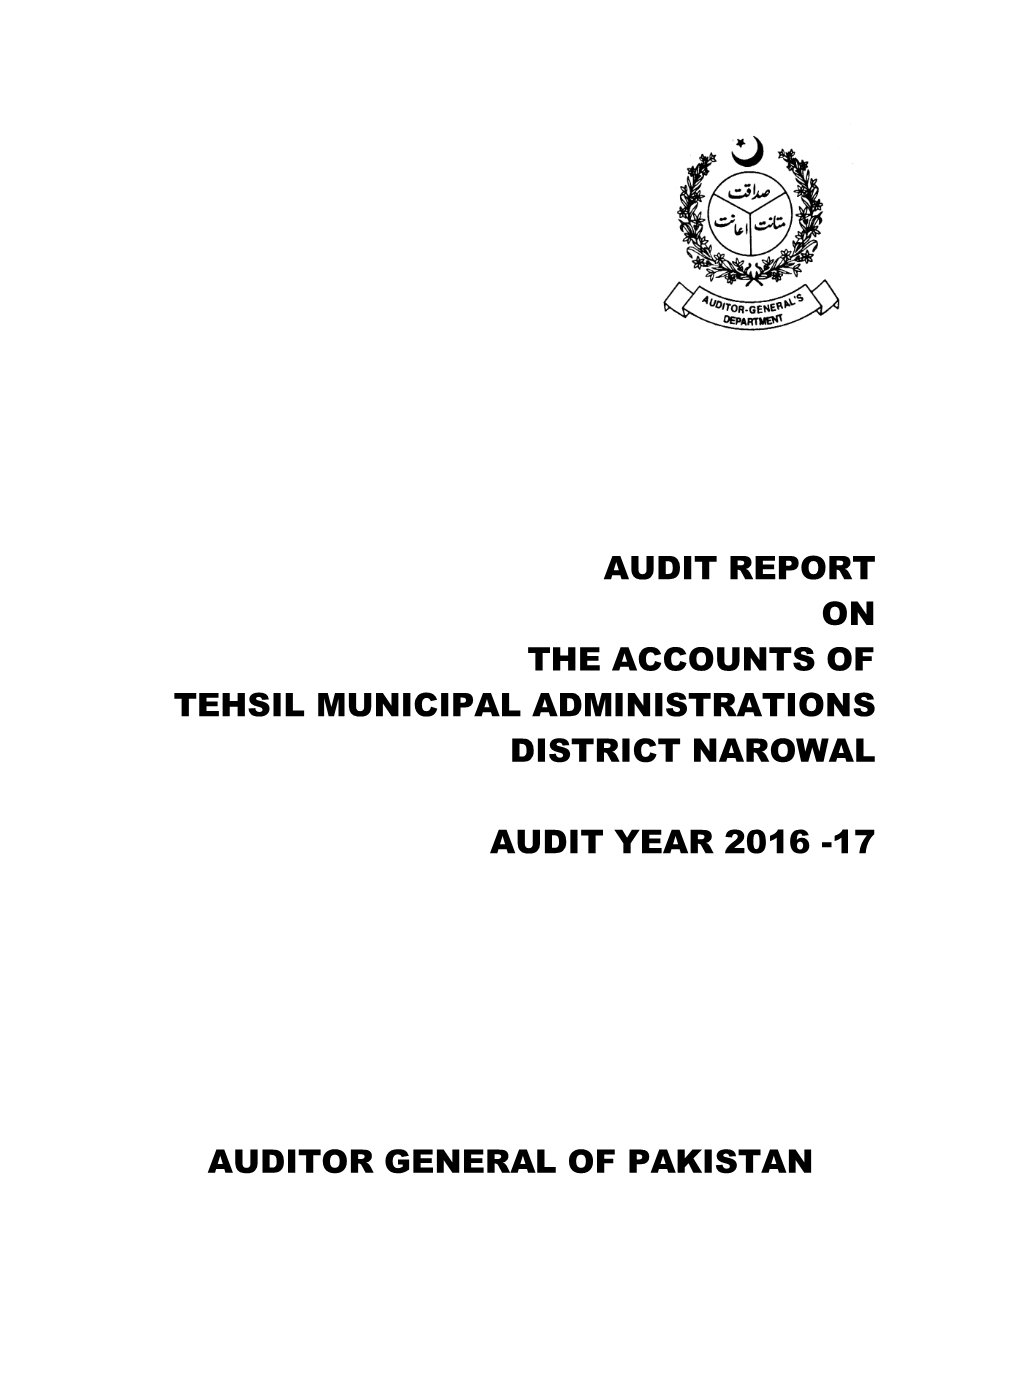 Audit Report on the Accounts of Tehsil Municipal Administrations District Narowal